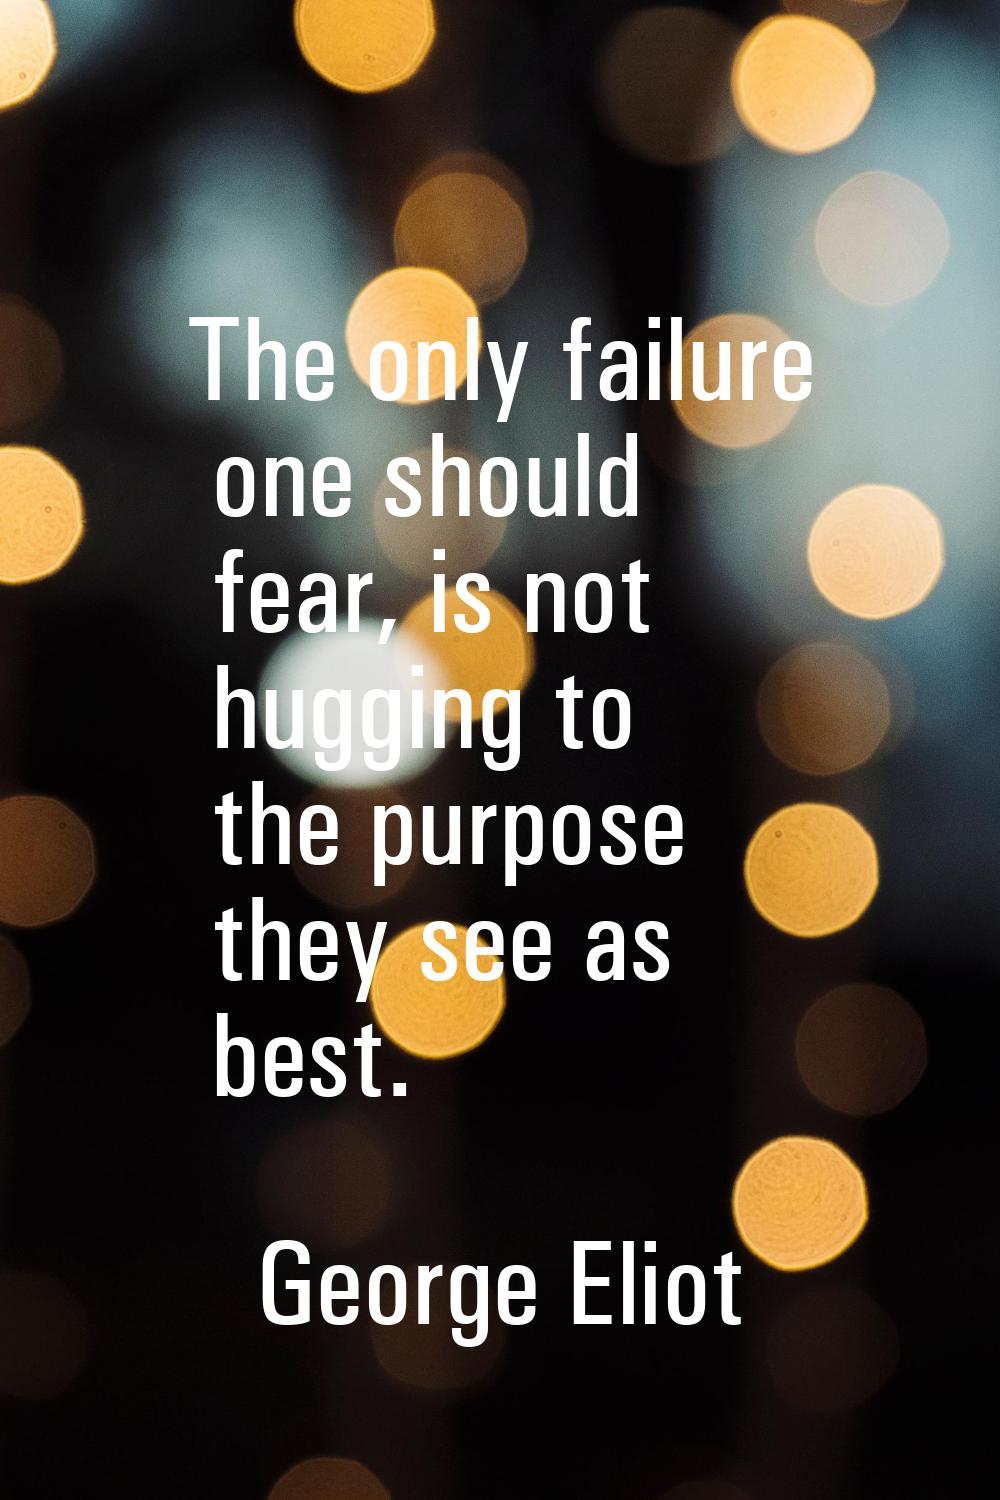 The only failure one should fear, is not hugging to the purpose they see as best.